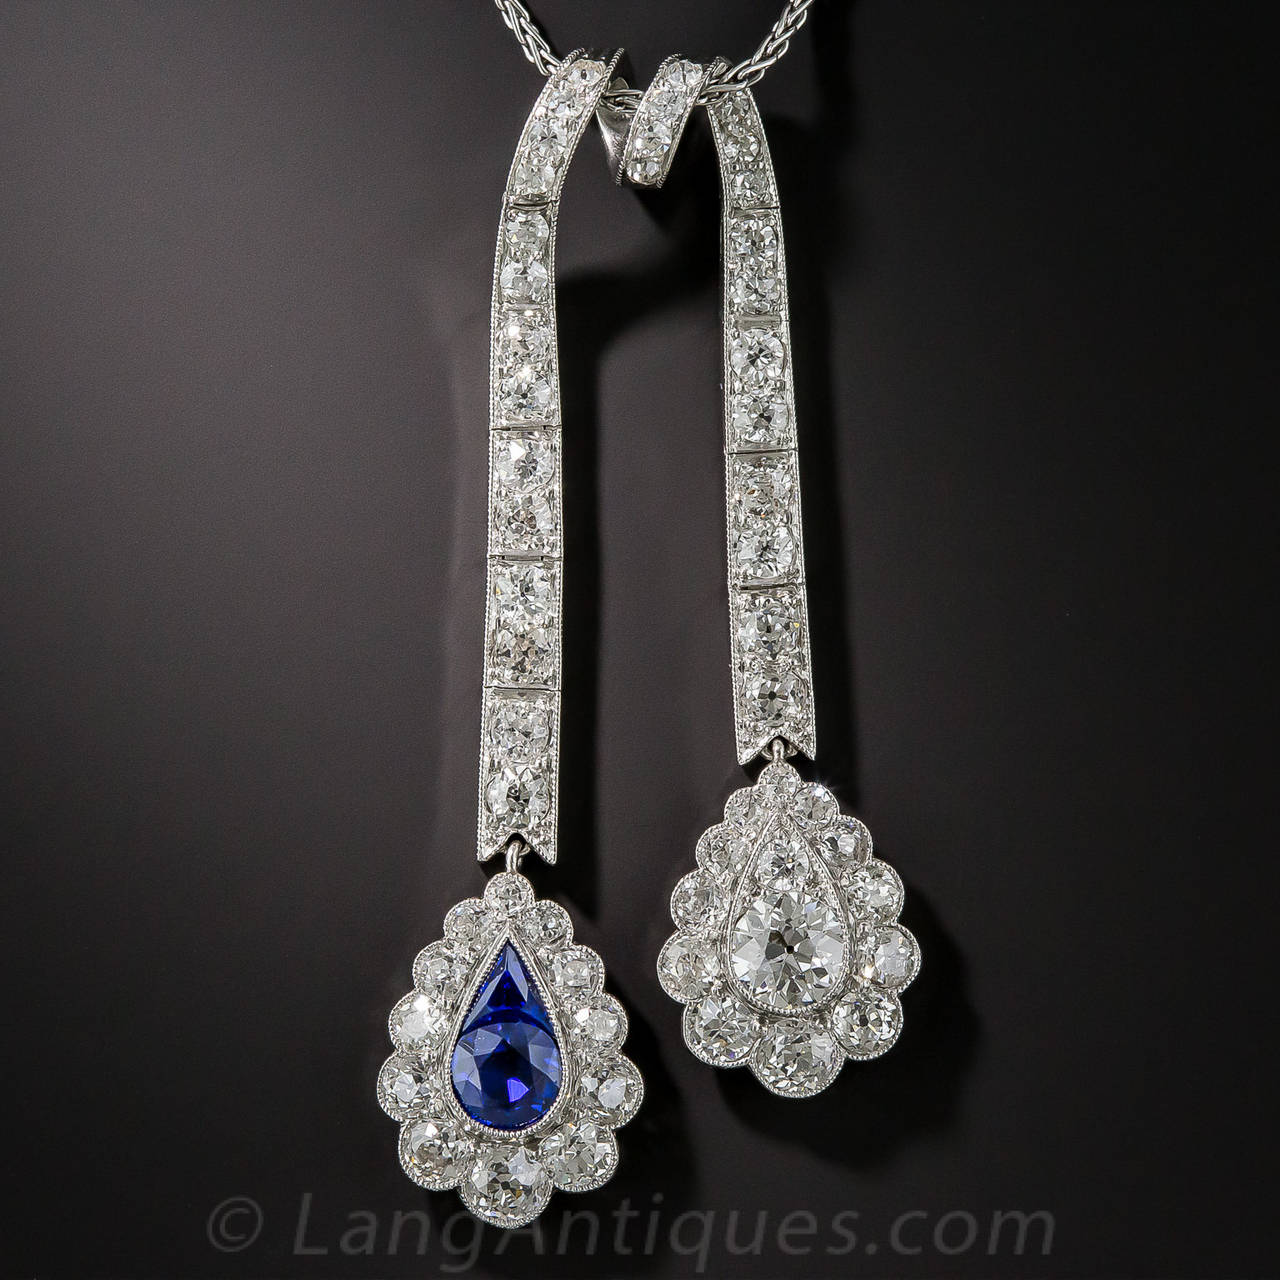 Edwardian Sapphire Diamond Platinum Negligee Necklace In Excellent Condition For Sale In San Francisco, CA